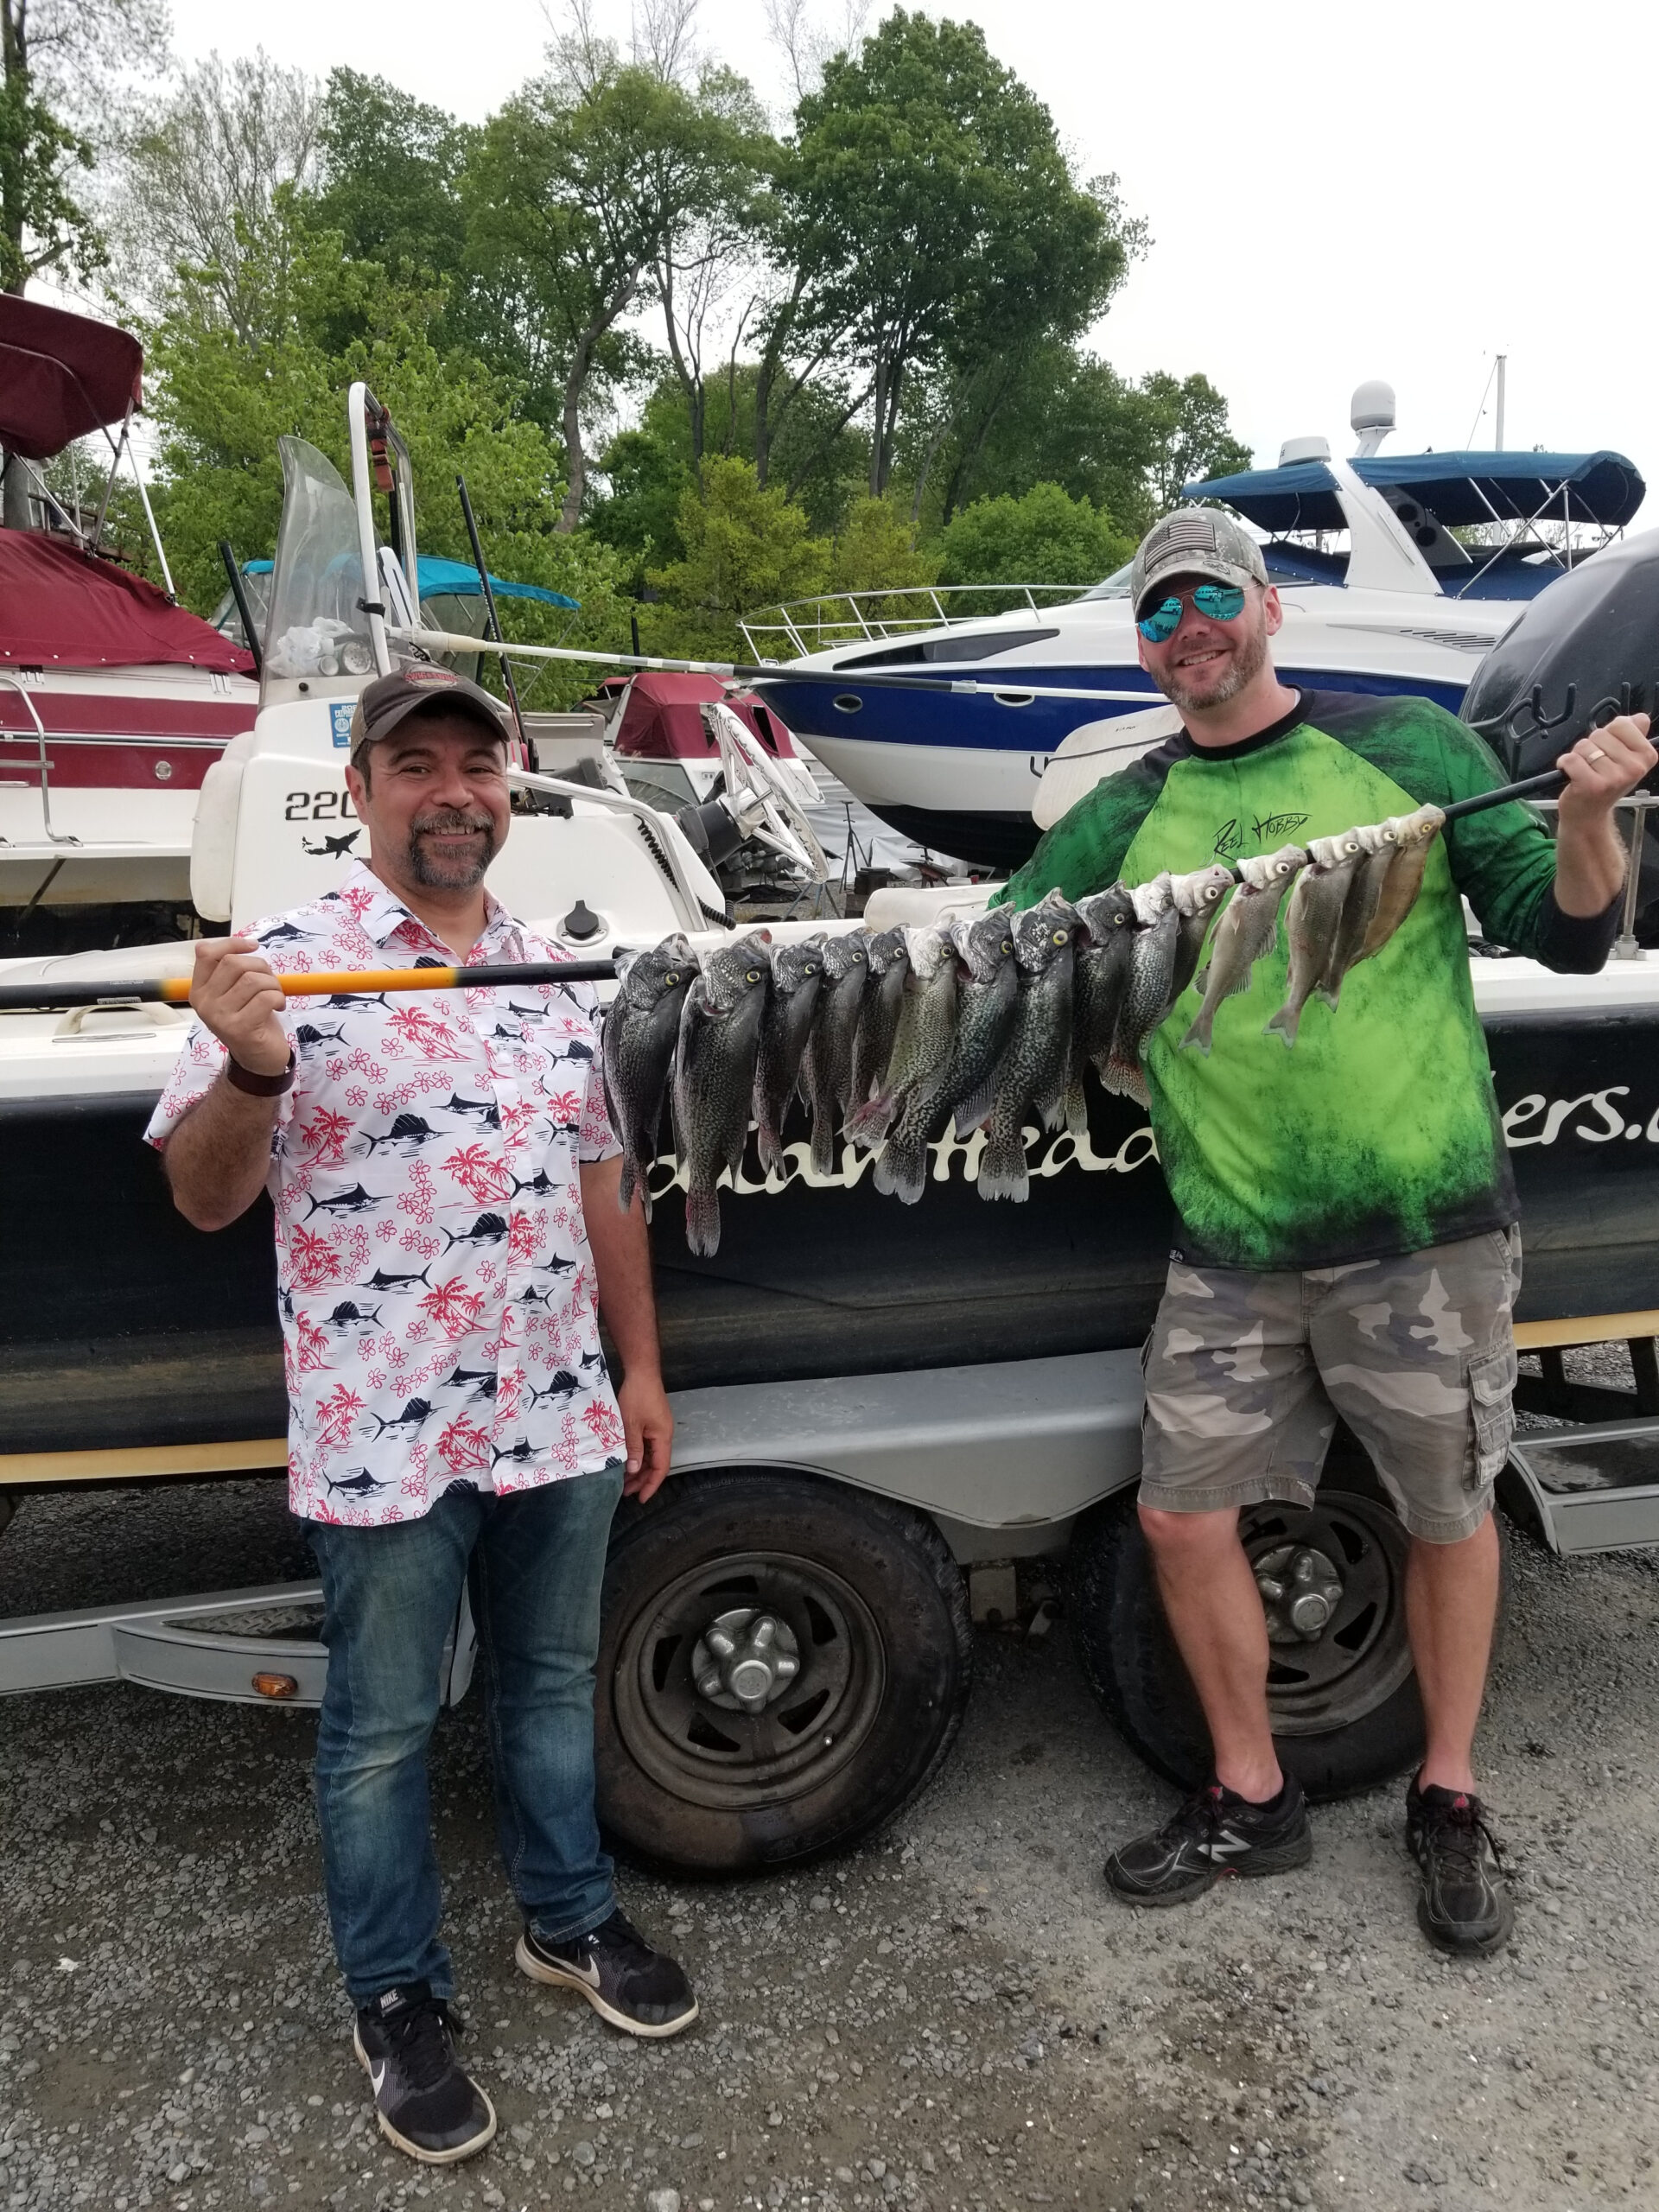 https://indianheadcharters.com/wp-content/uploads/2021/05/4-29-21-scaled.jpg